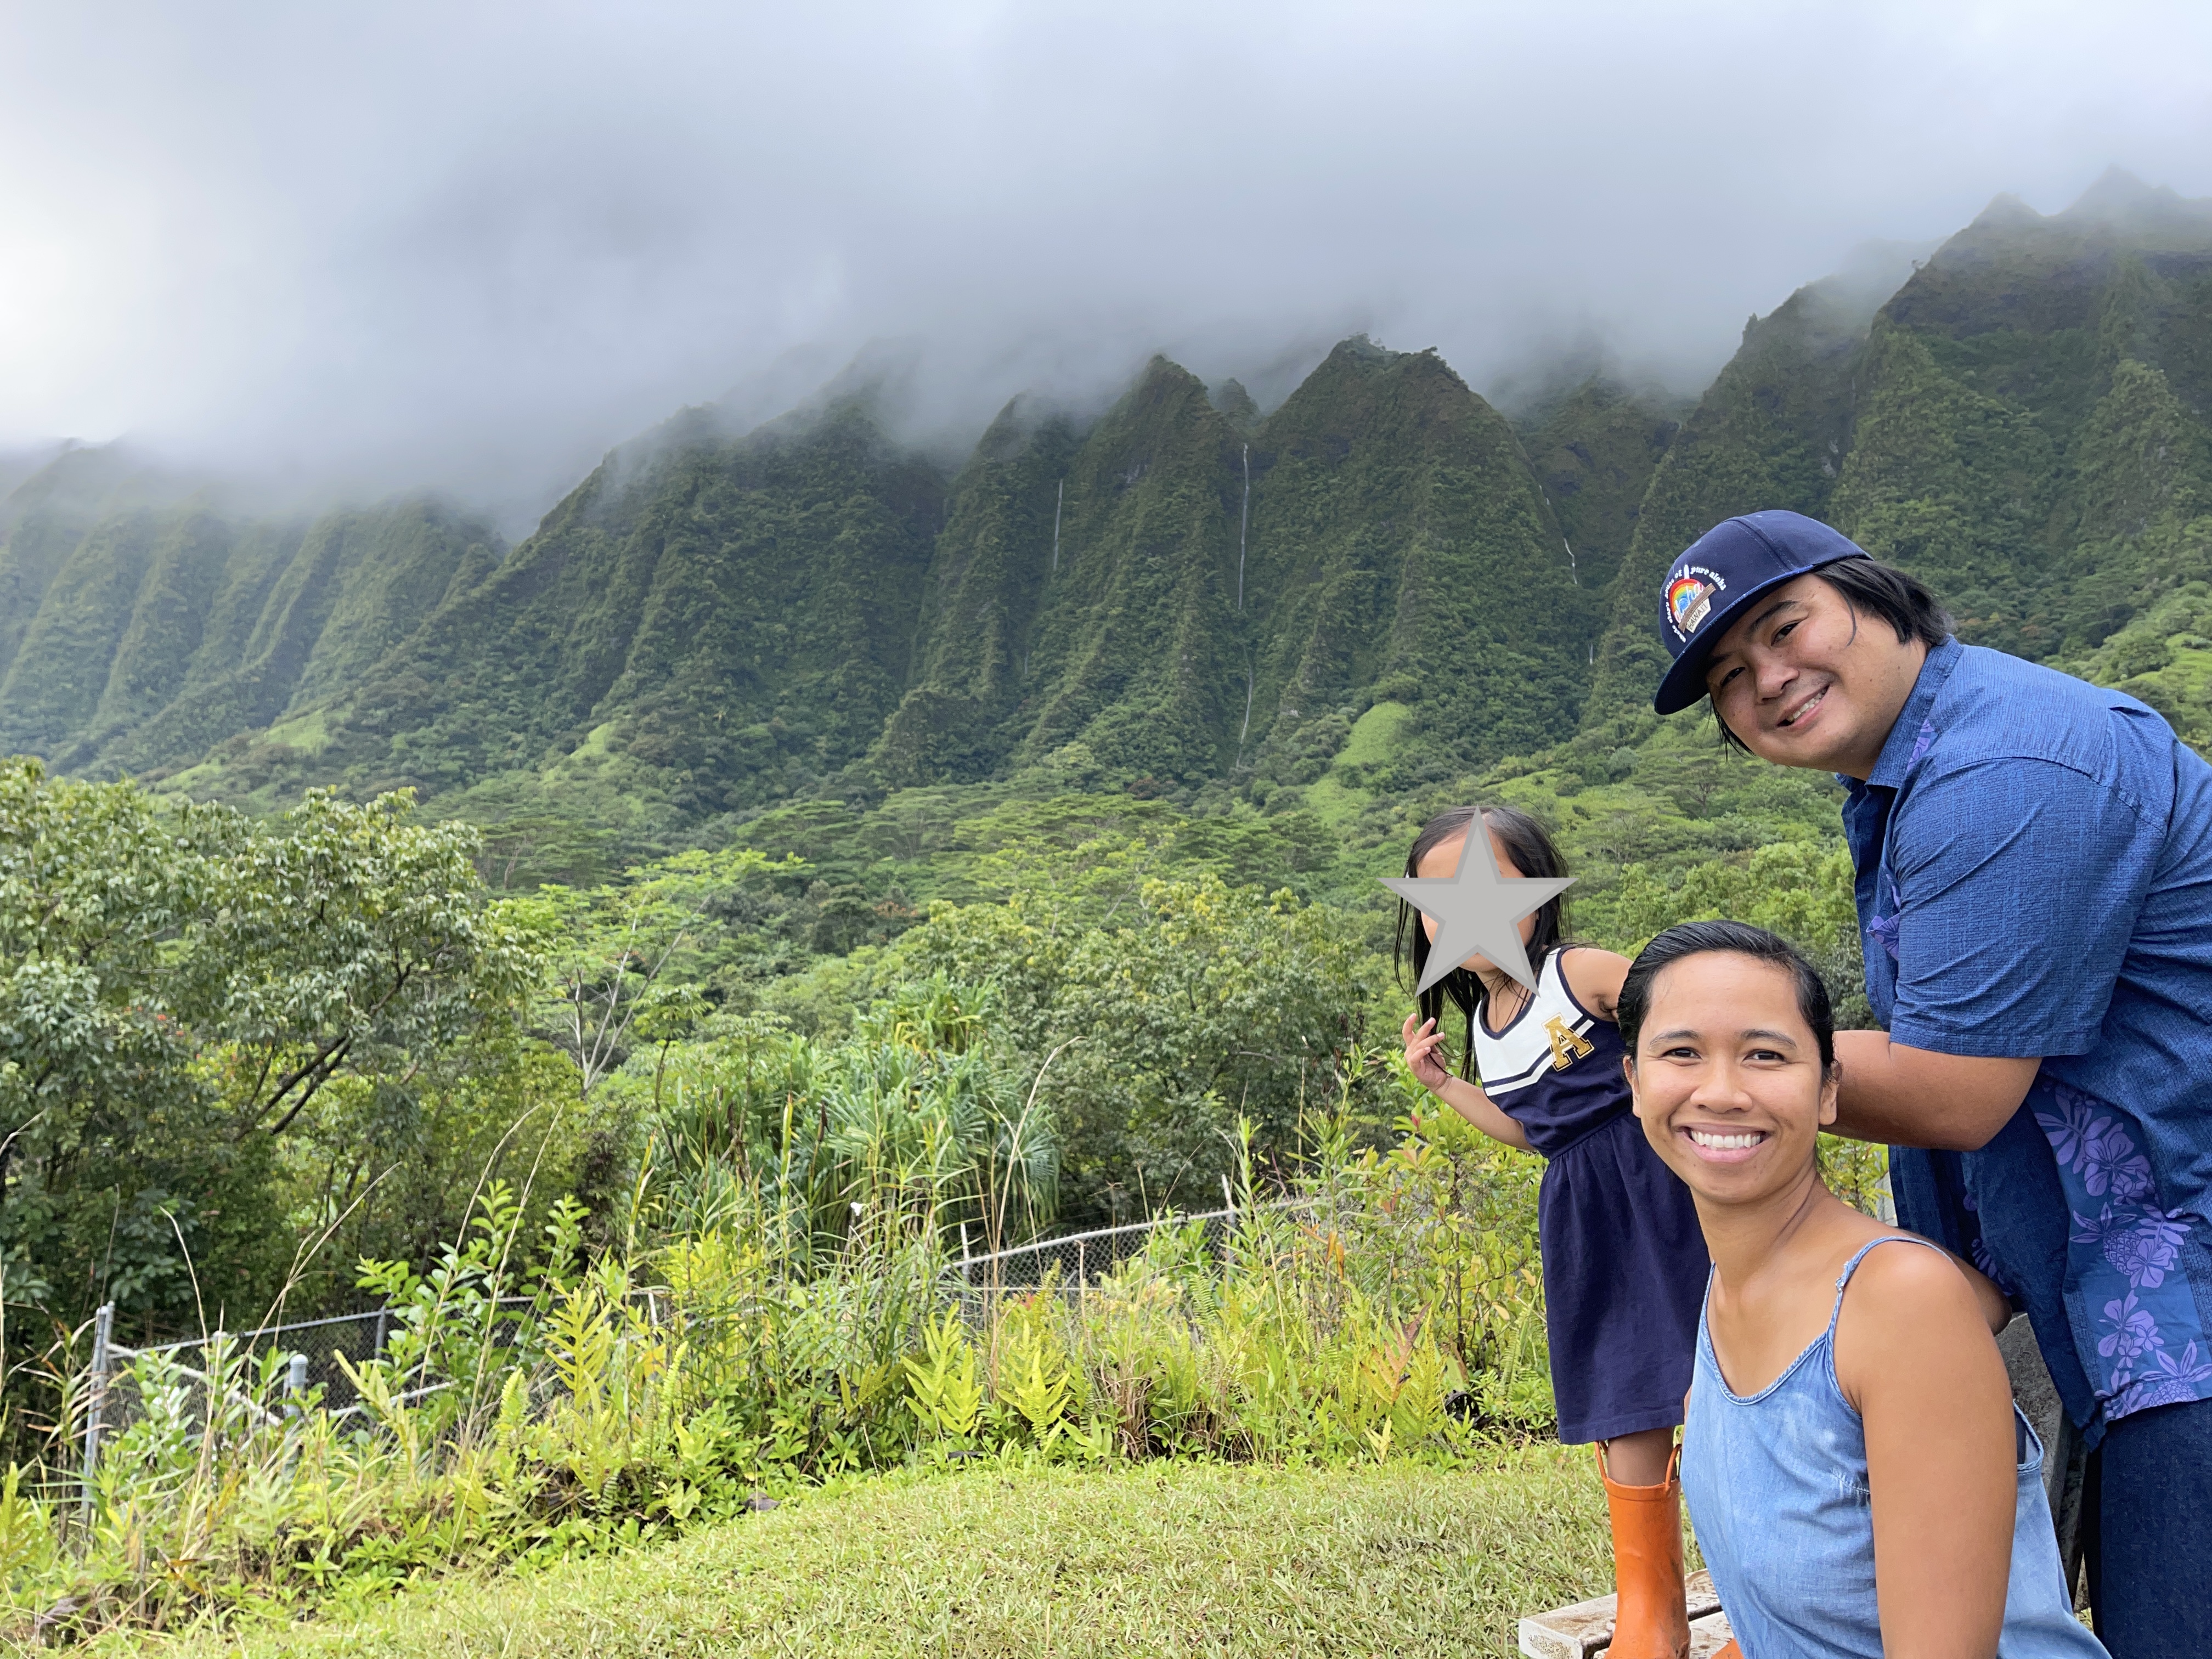 A family smiles at the camera against a backdrop of lush green mountains and mini waterfalls.